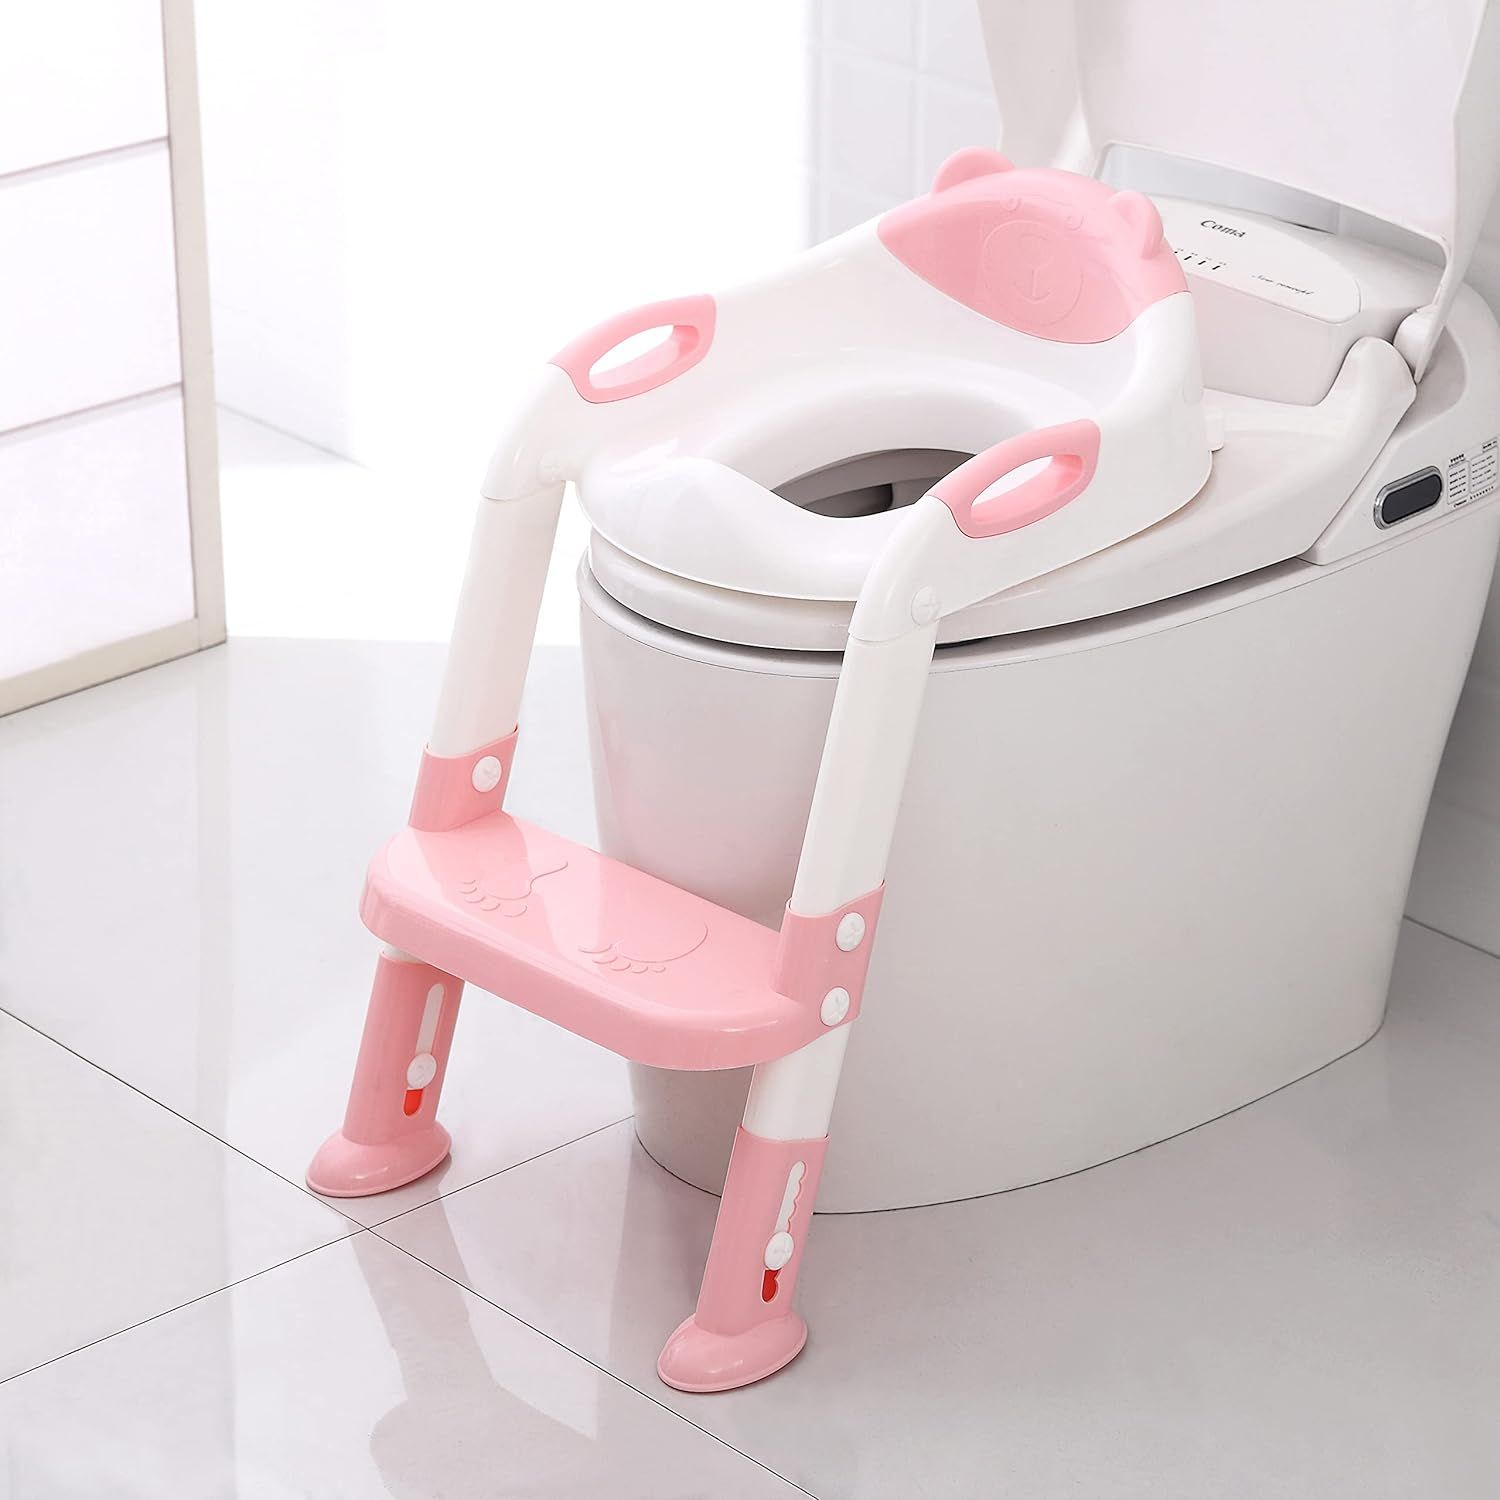 Best Potty Training Products